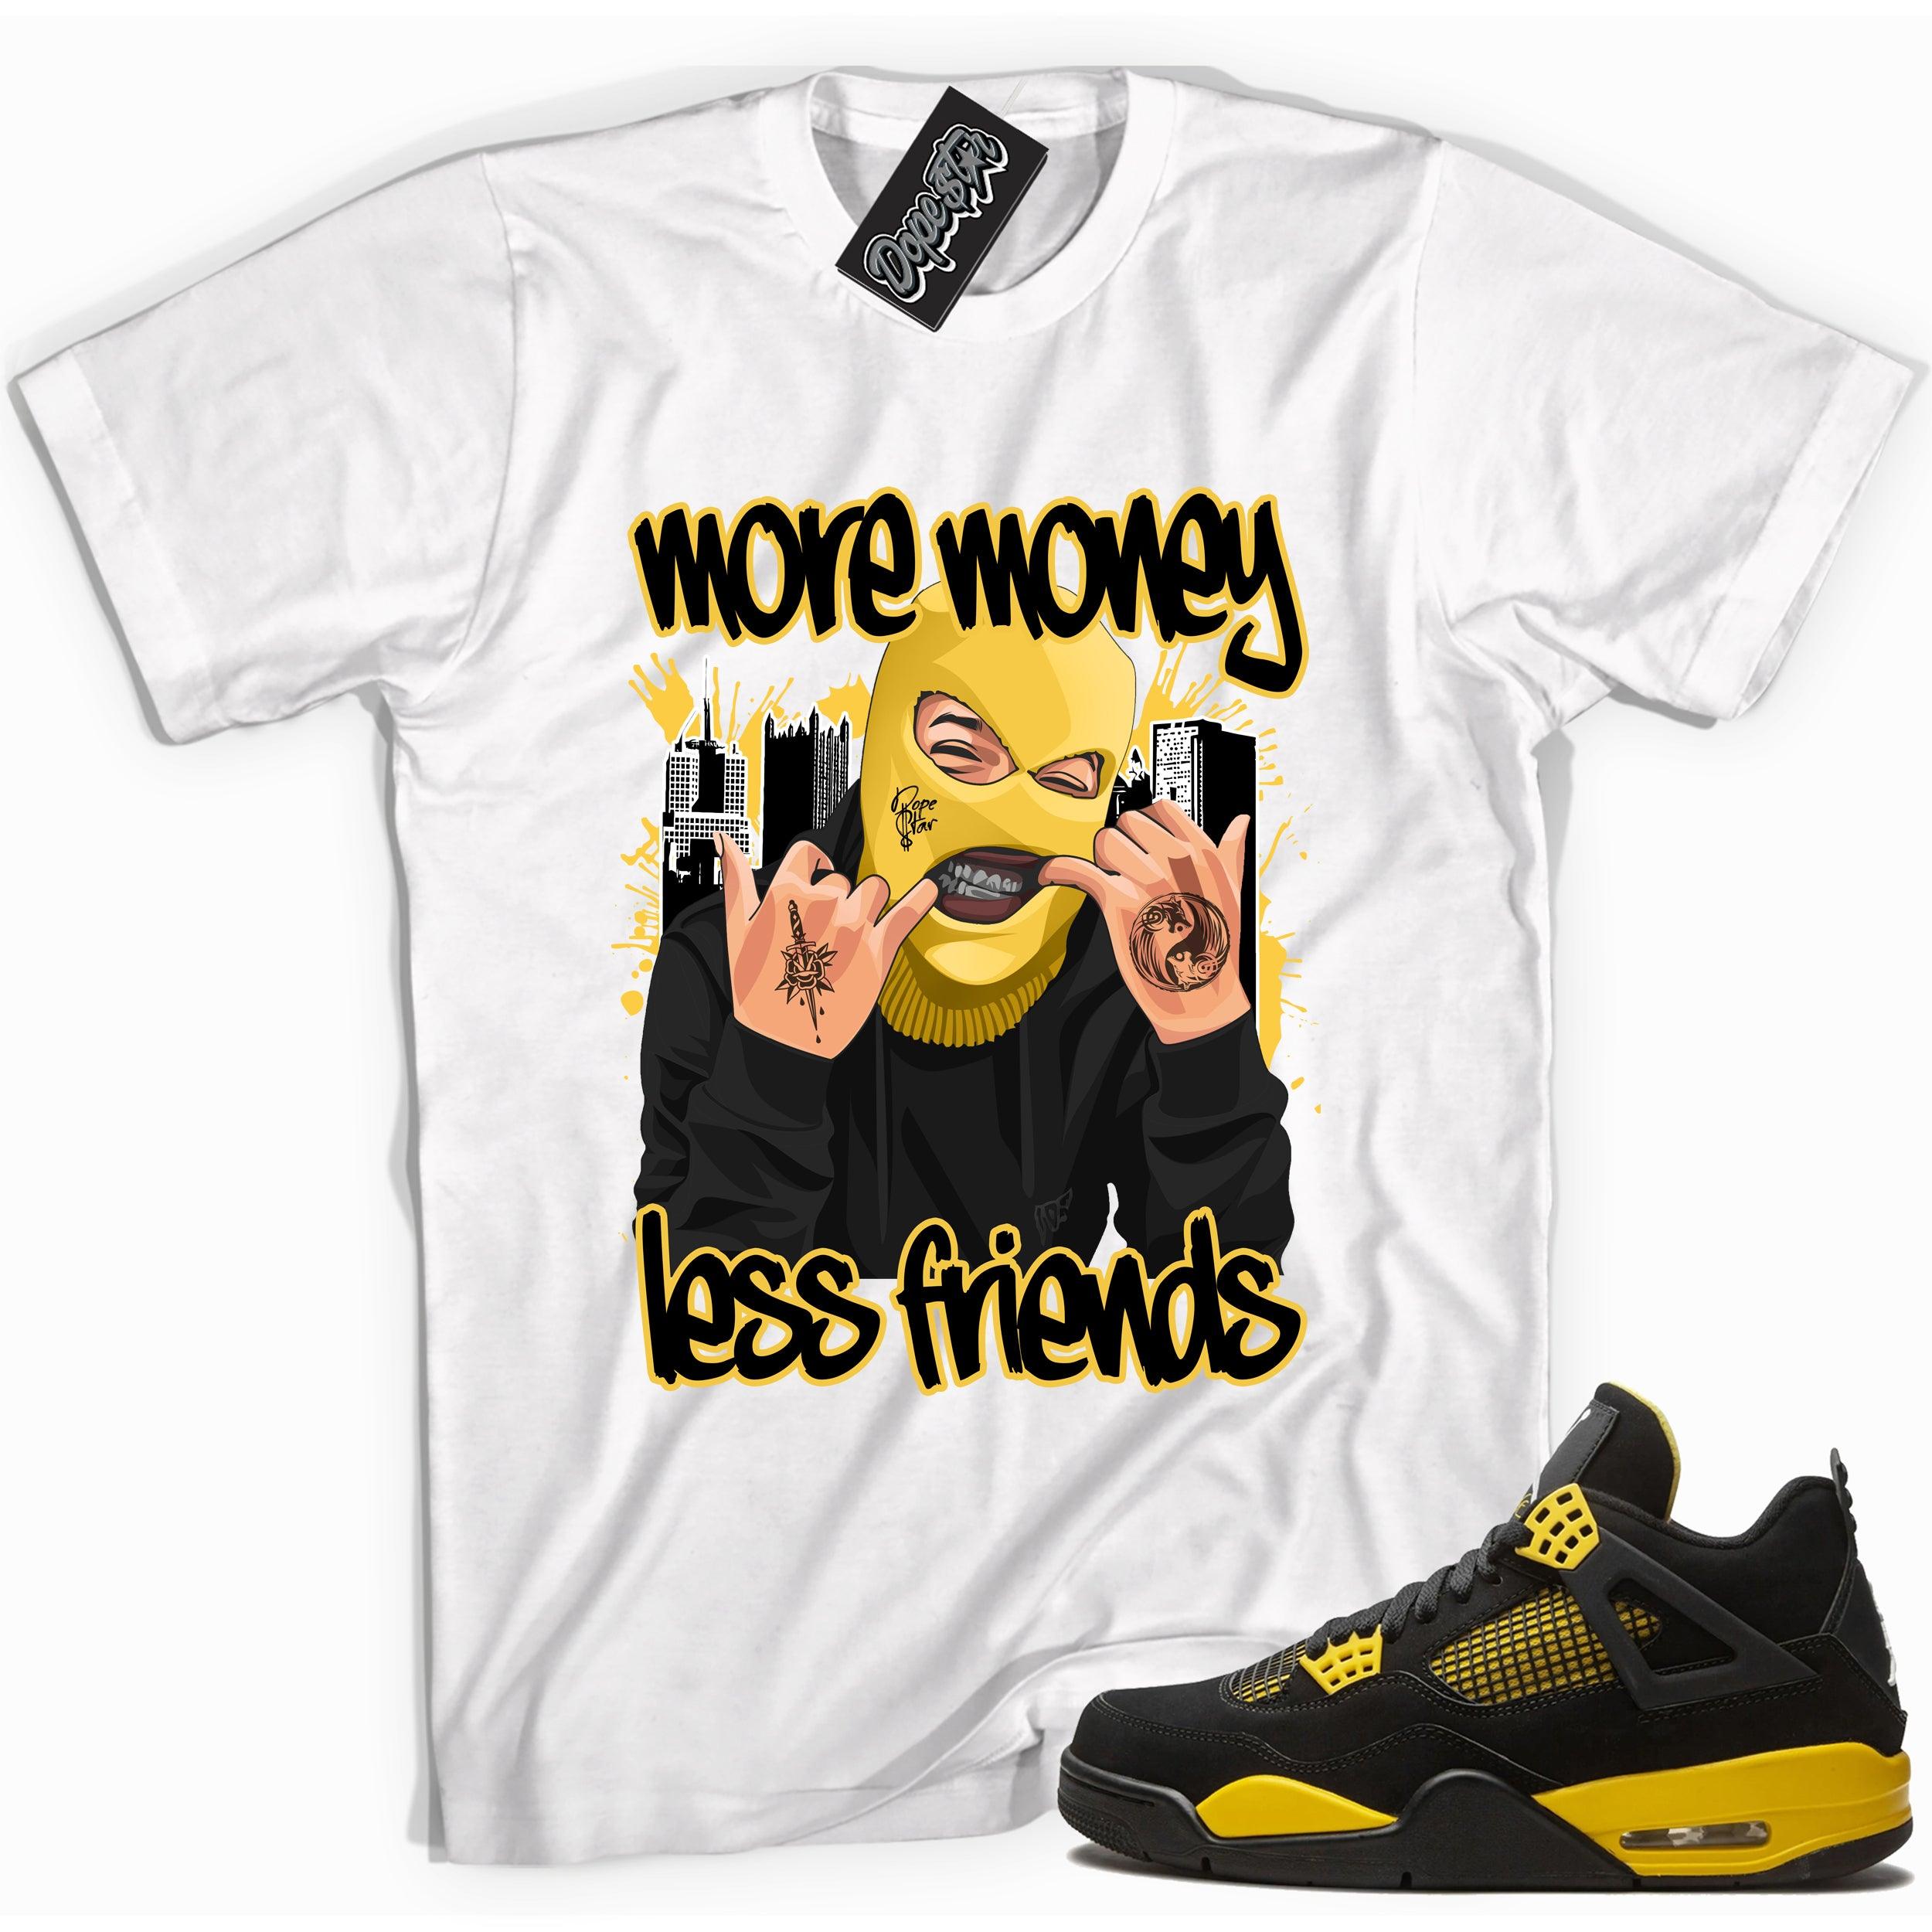 Cool white graphic tee with 'more money less friends' print, that perfectly matches Air Jordan 4 Thunder sneakers